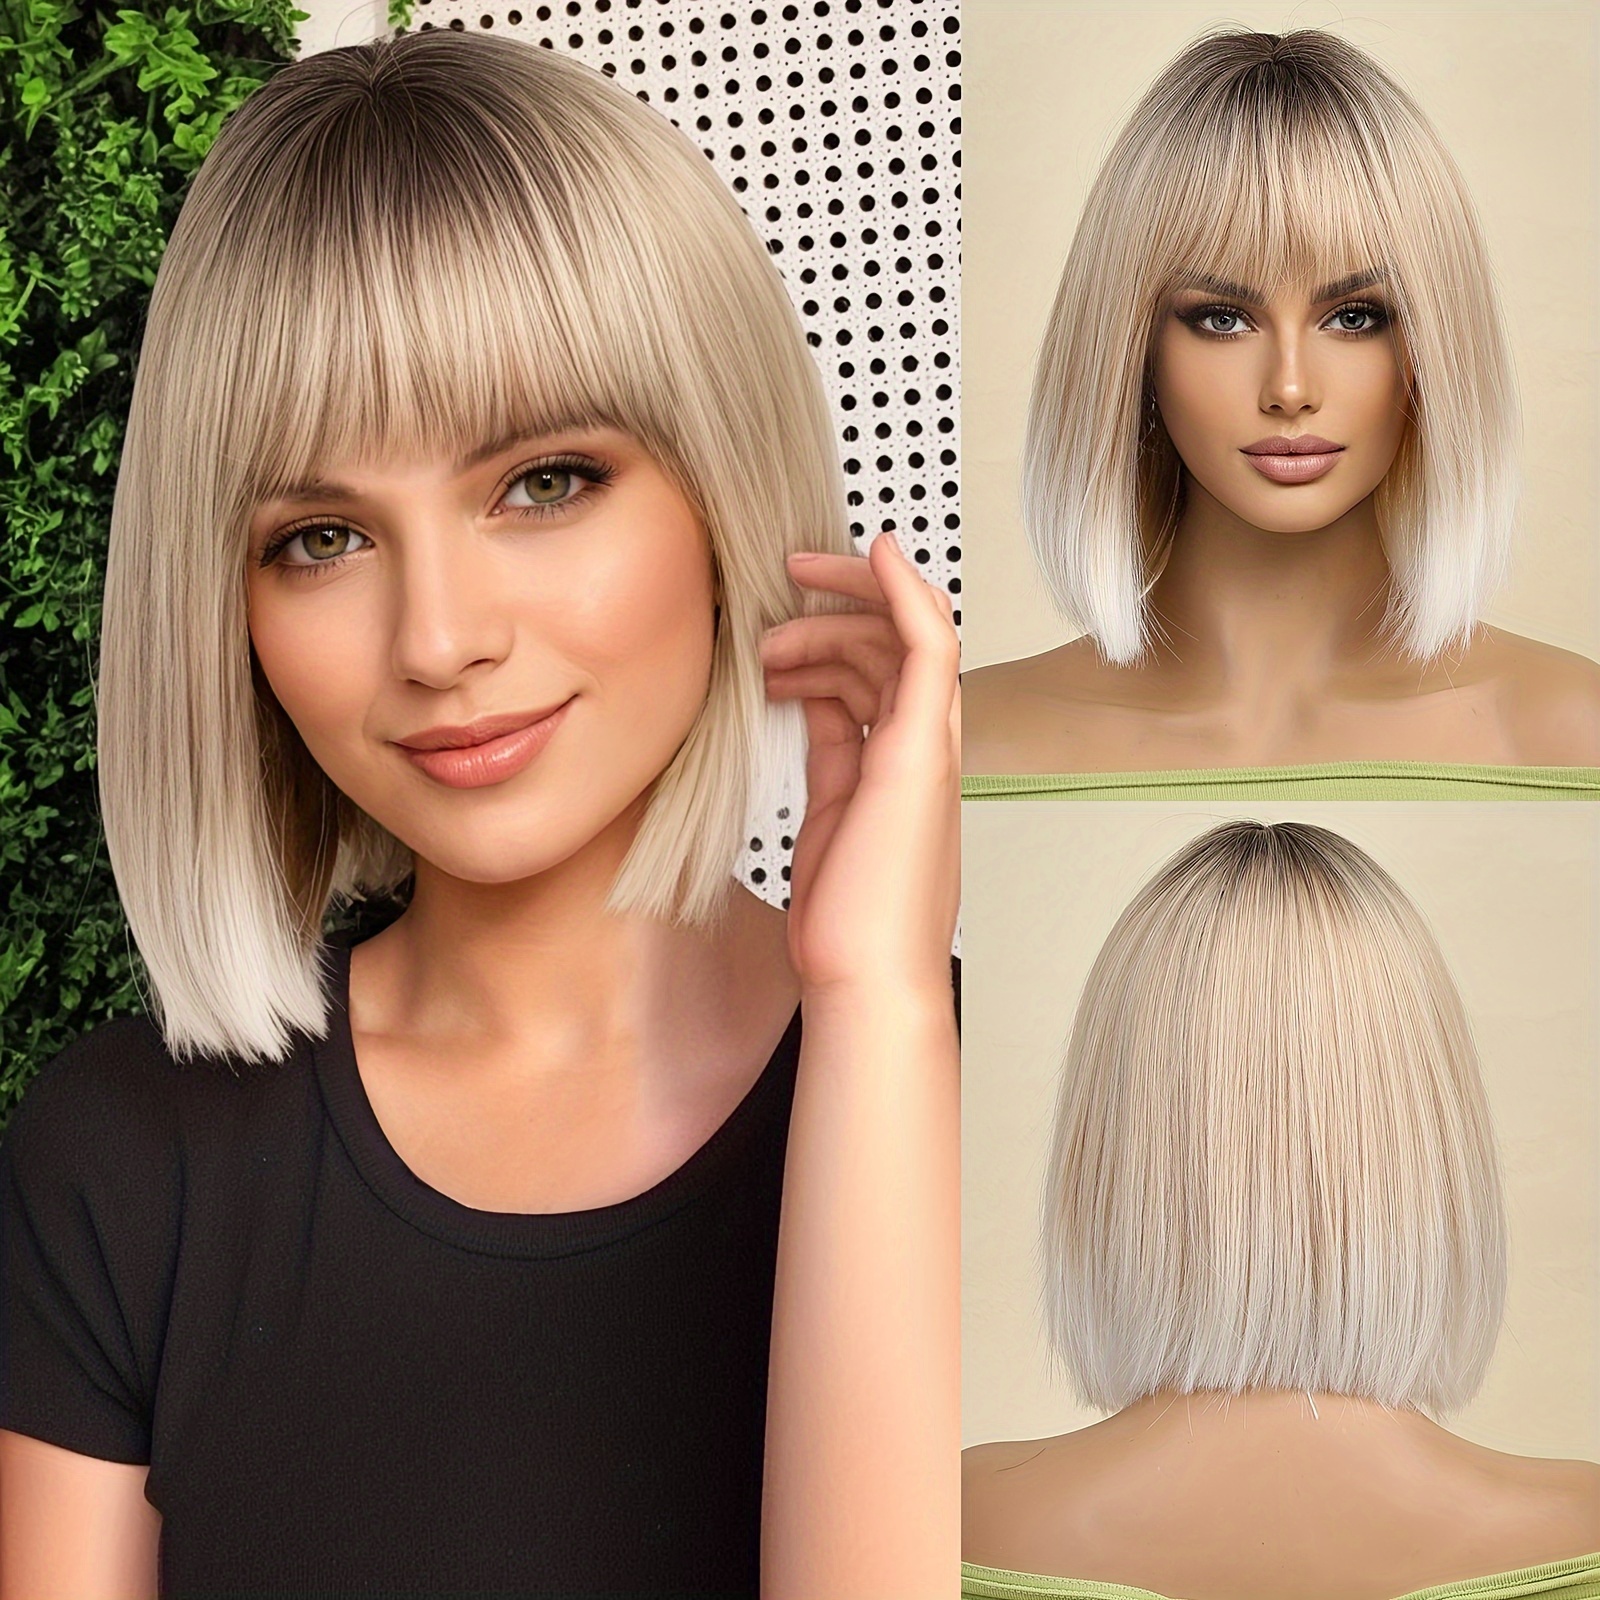 

Ombre Dark Root Blonde Wig With Bangs - Short Bob Style For Women - Natural Looking And Comfortable